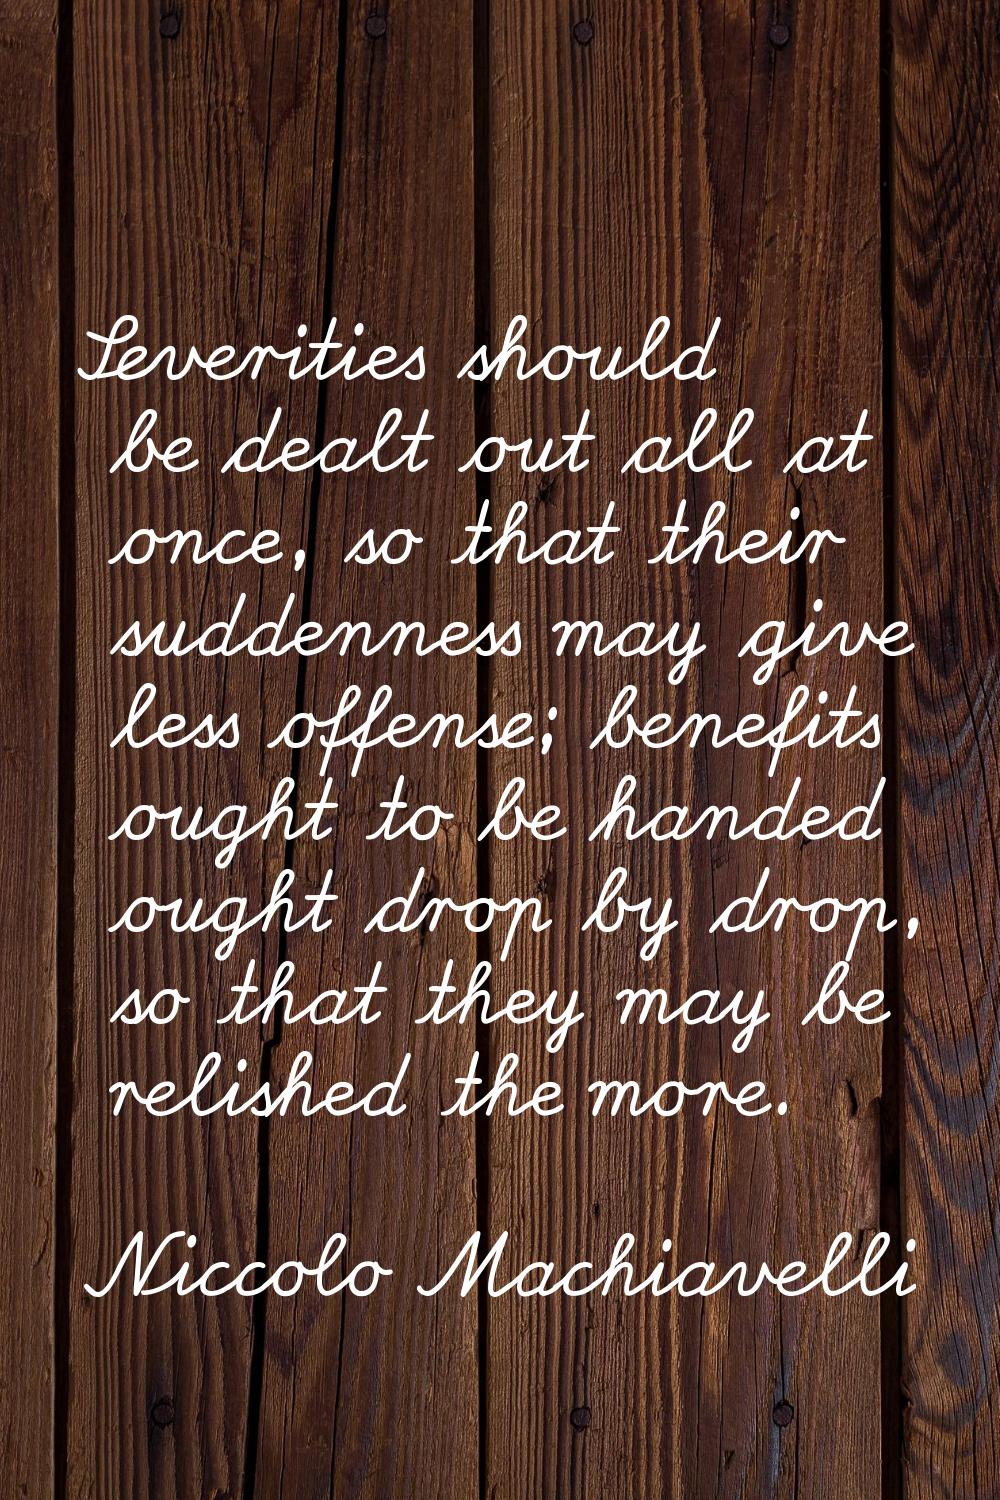 Severities should be dealt out all at once, so that their suddenness may give less offense; benefit